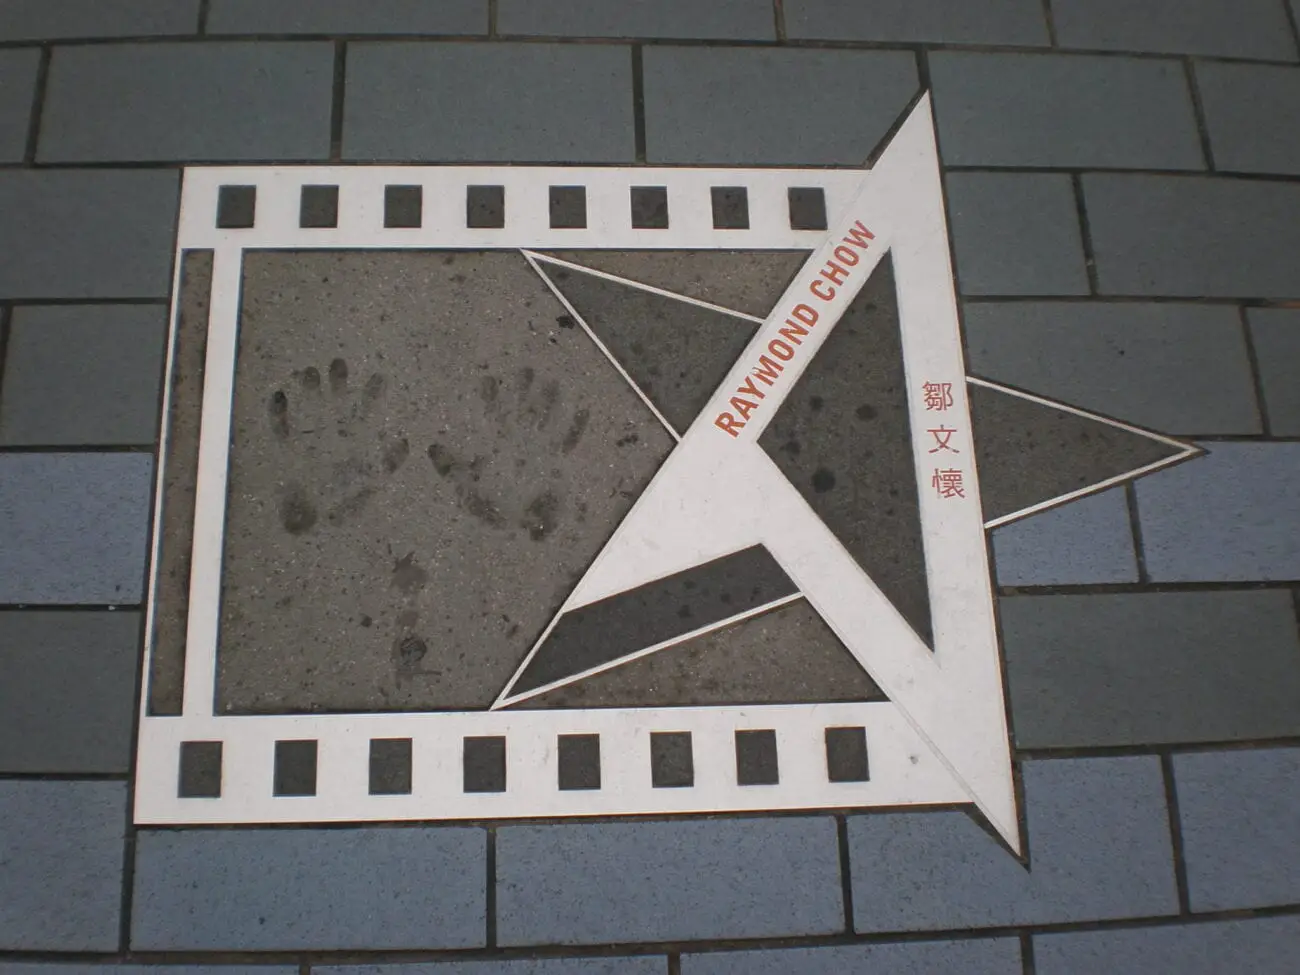 Raymond Chow's star on the Avenue of Stars, celebrating the career of the great producer.